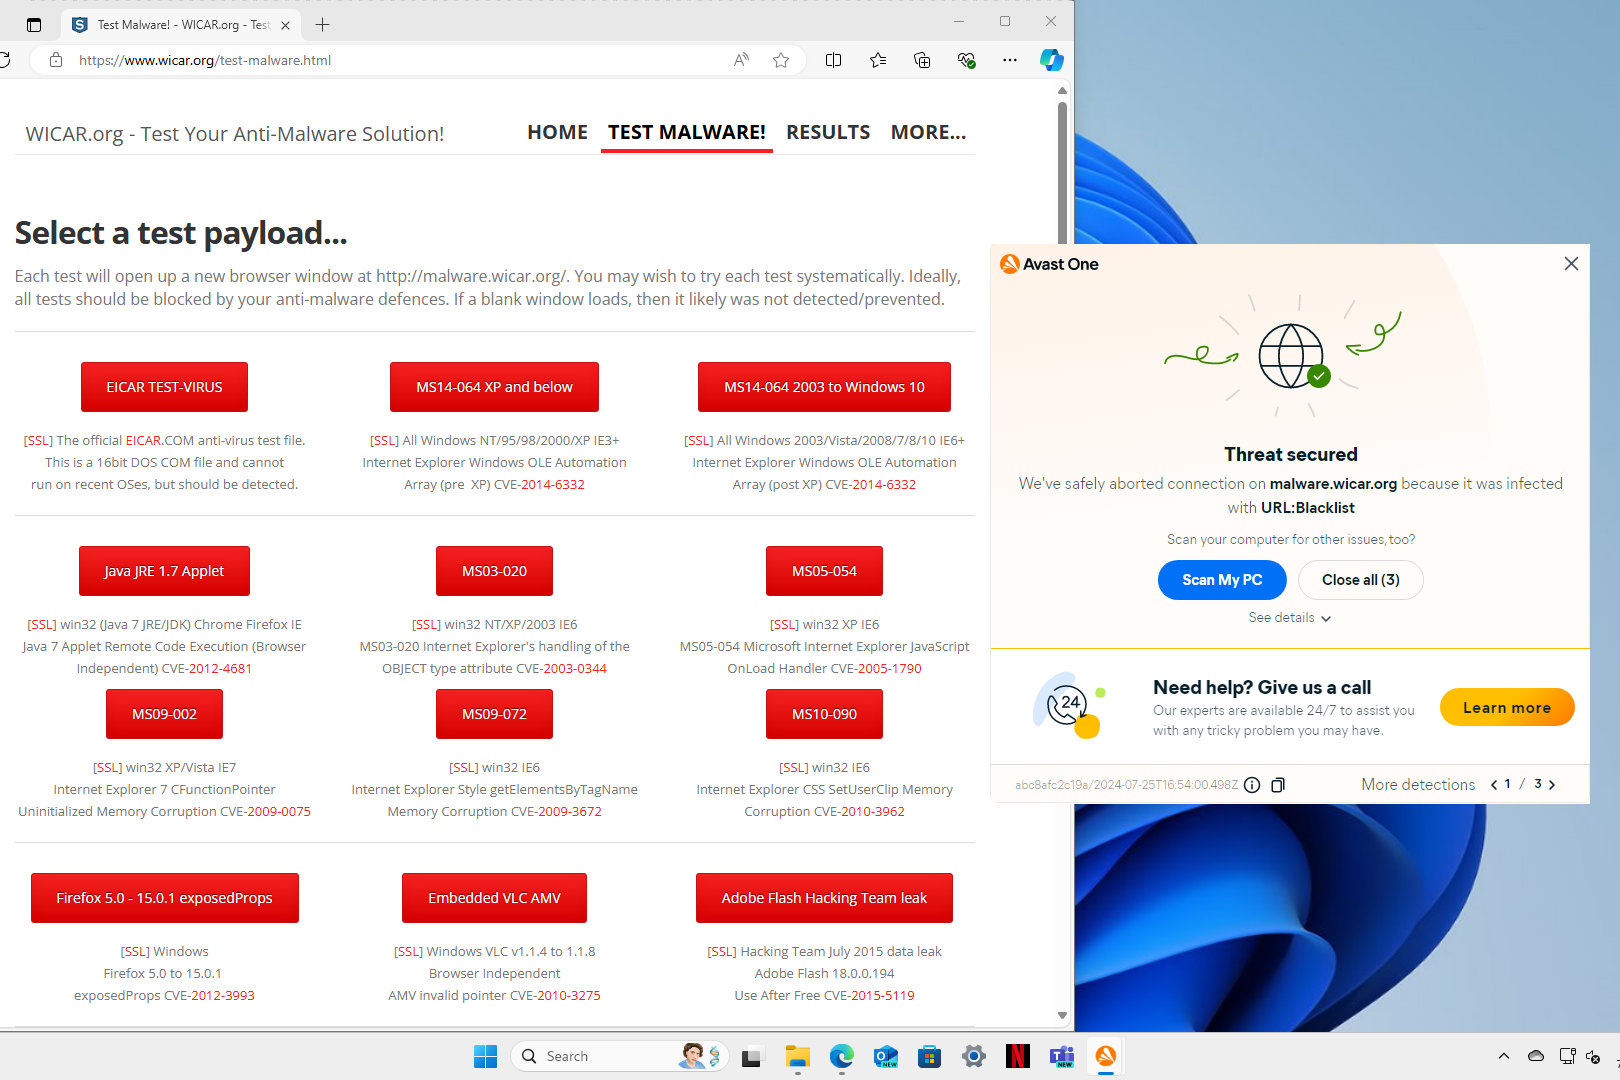 Avast One Gold blocked the threats on Wicar's virus test page.